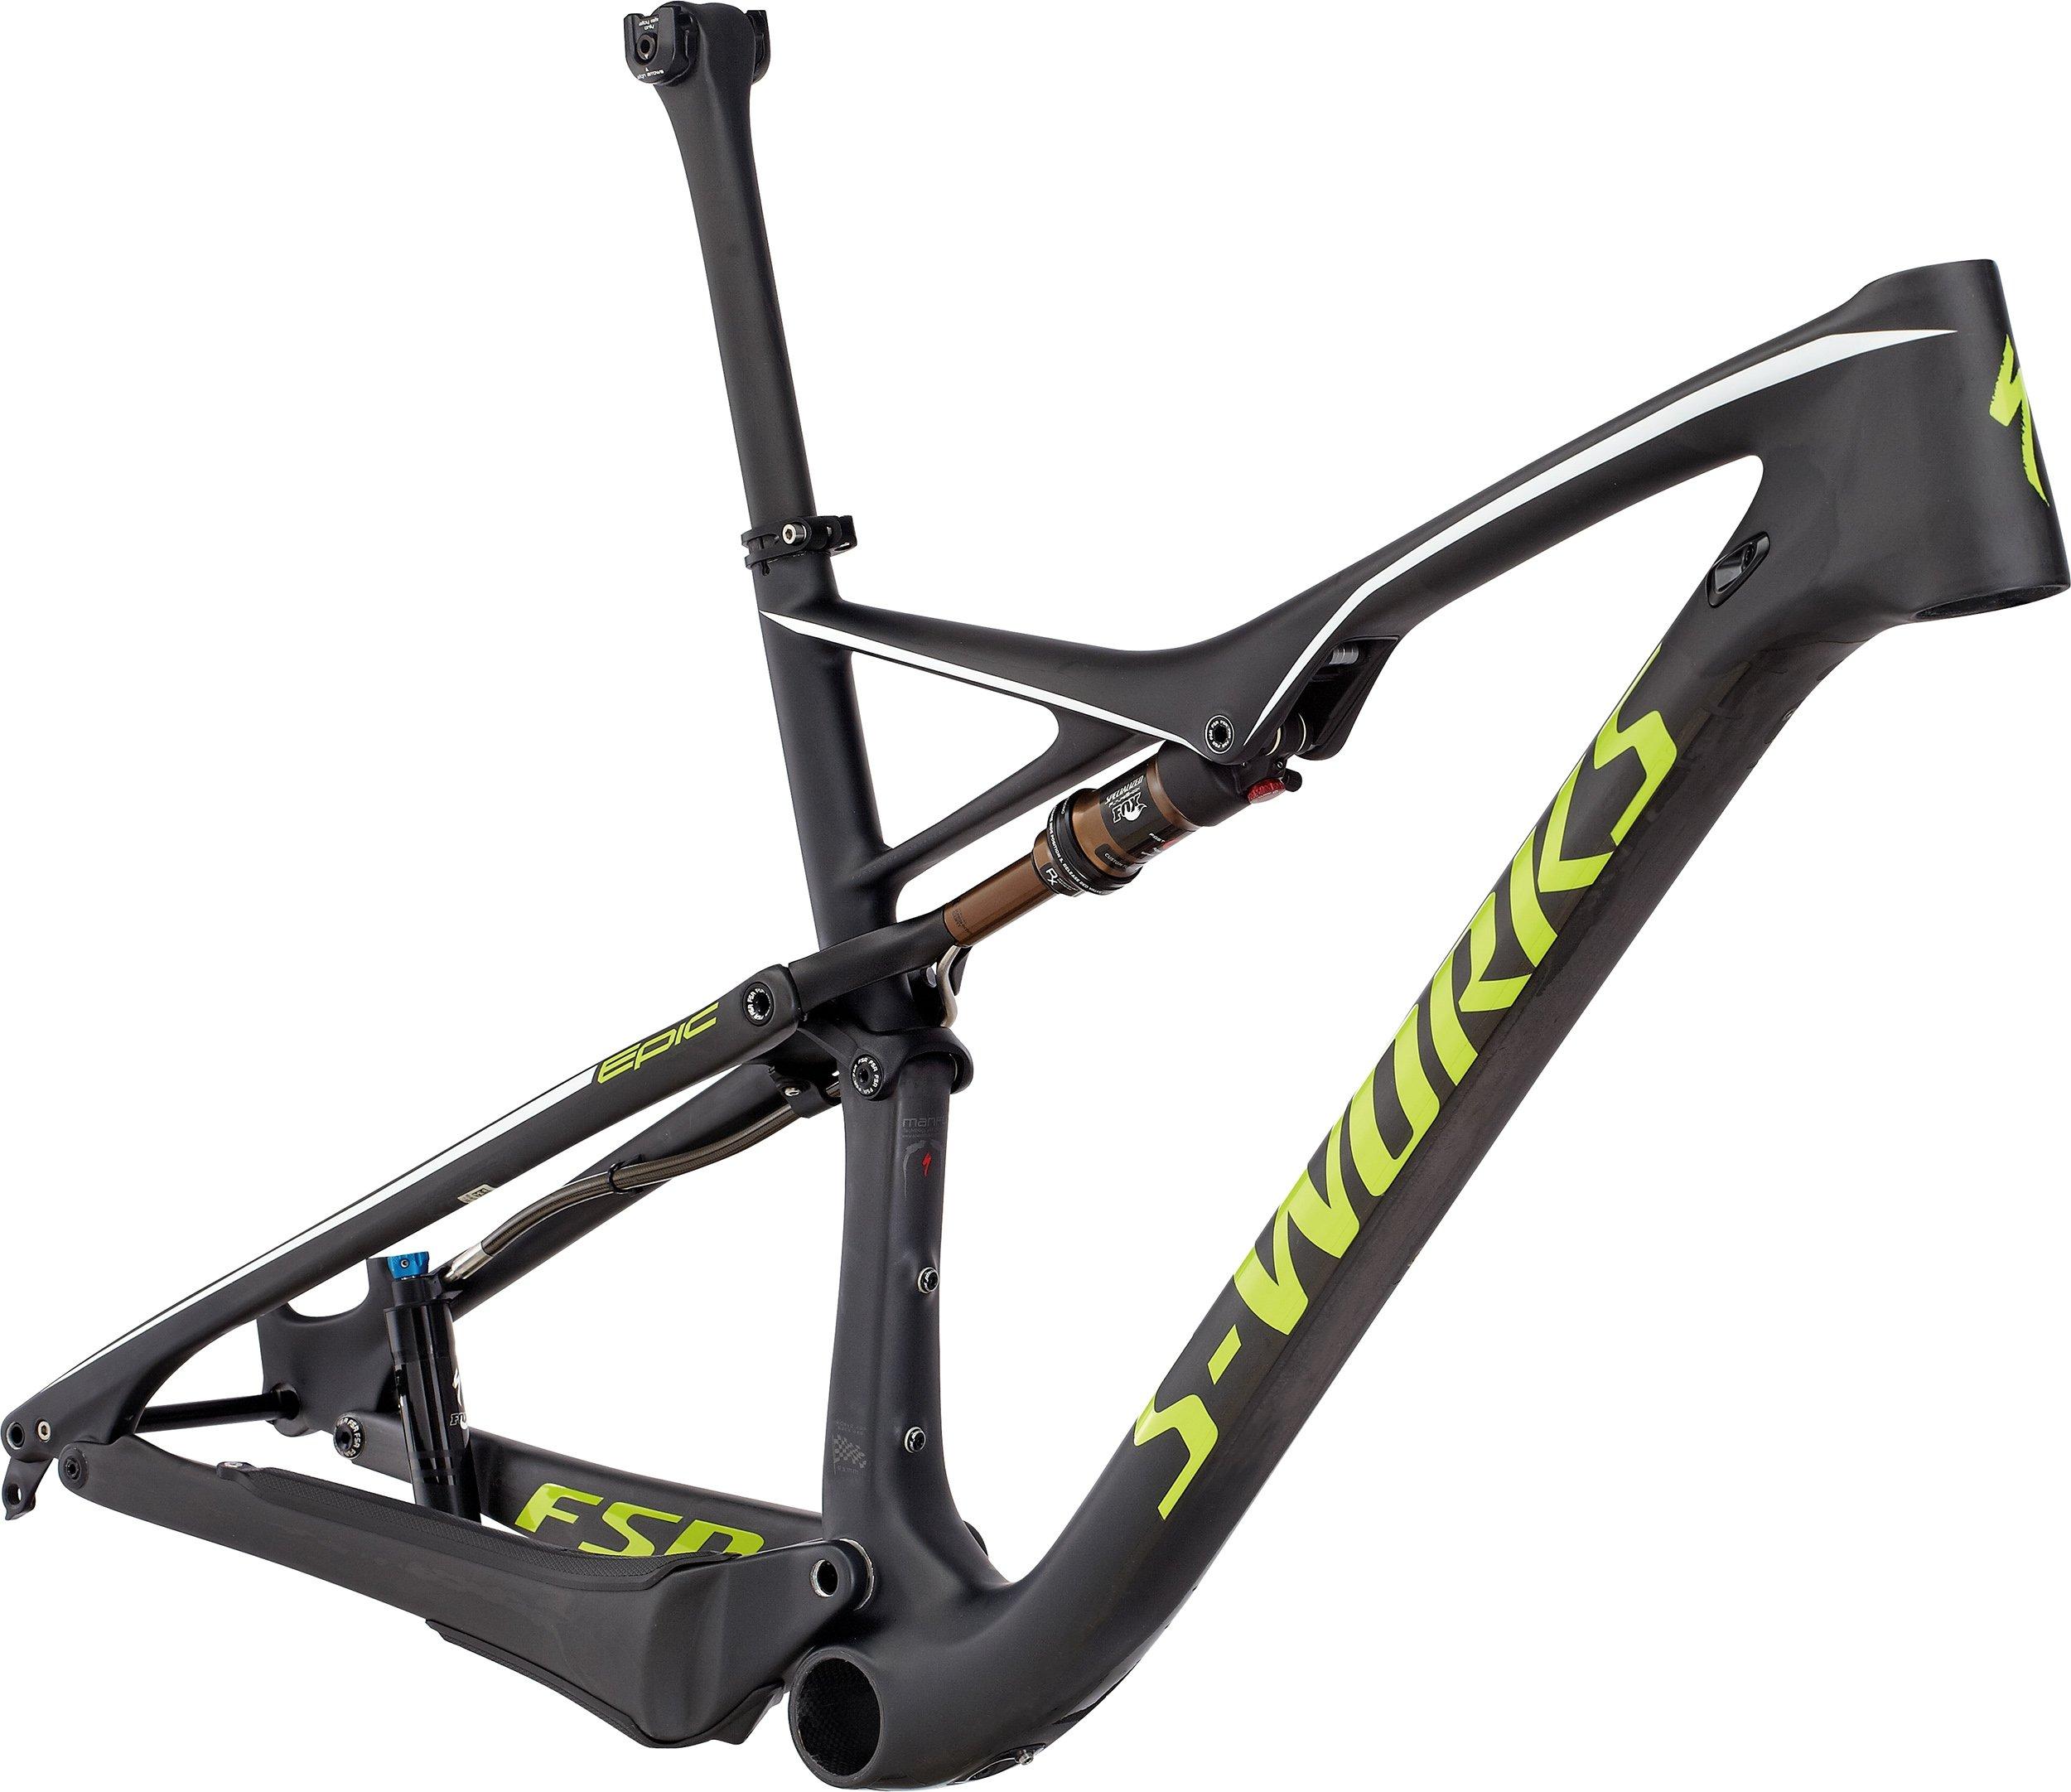 Carbon world cup. Specialized s-works Epic 2017. Specialized s-works Epic FSR Carbon 2008-2009. S-works Epic Hardtail. Epic s-works WC 2023 Green.